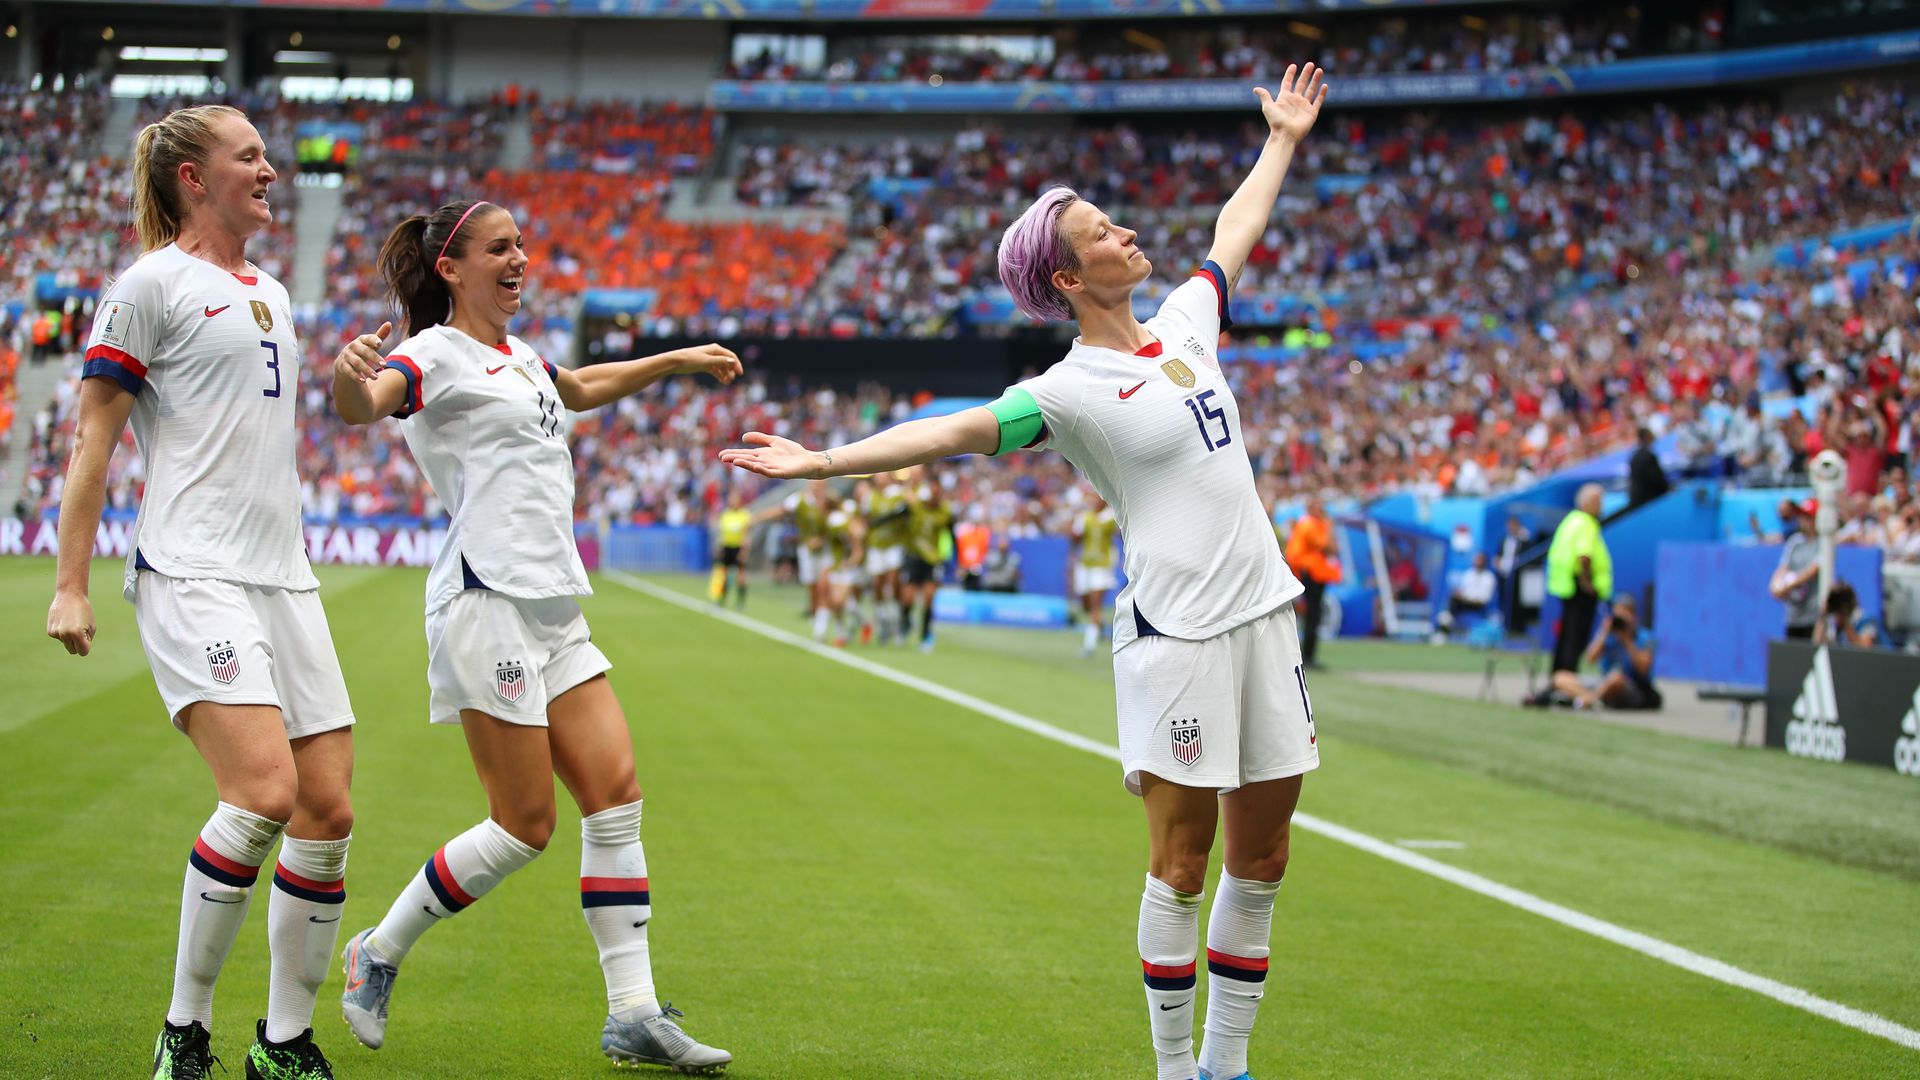 Megan Rapinoe of the USA celebrates with teammates Alex Morgan and Samantha Mewis after scoring during the 2019 FIFA Women's World Cup France Final match.